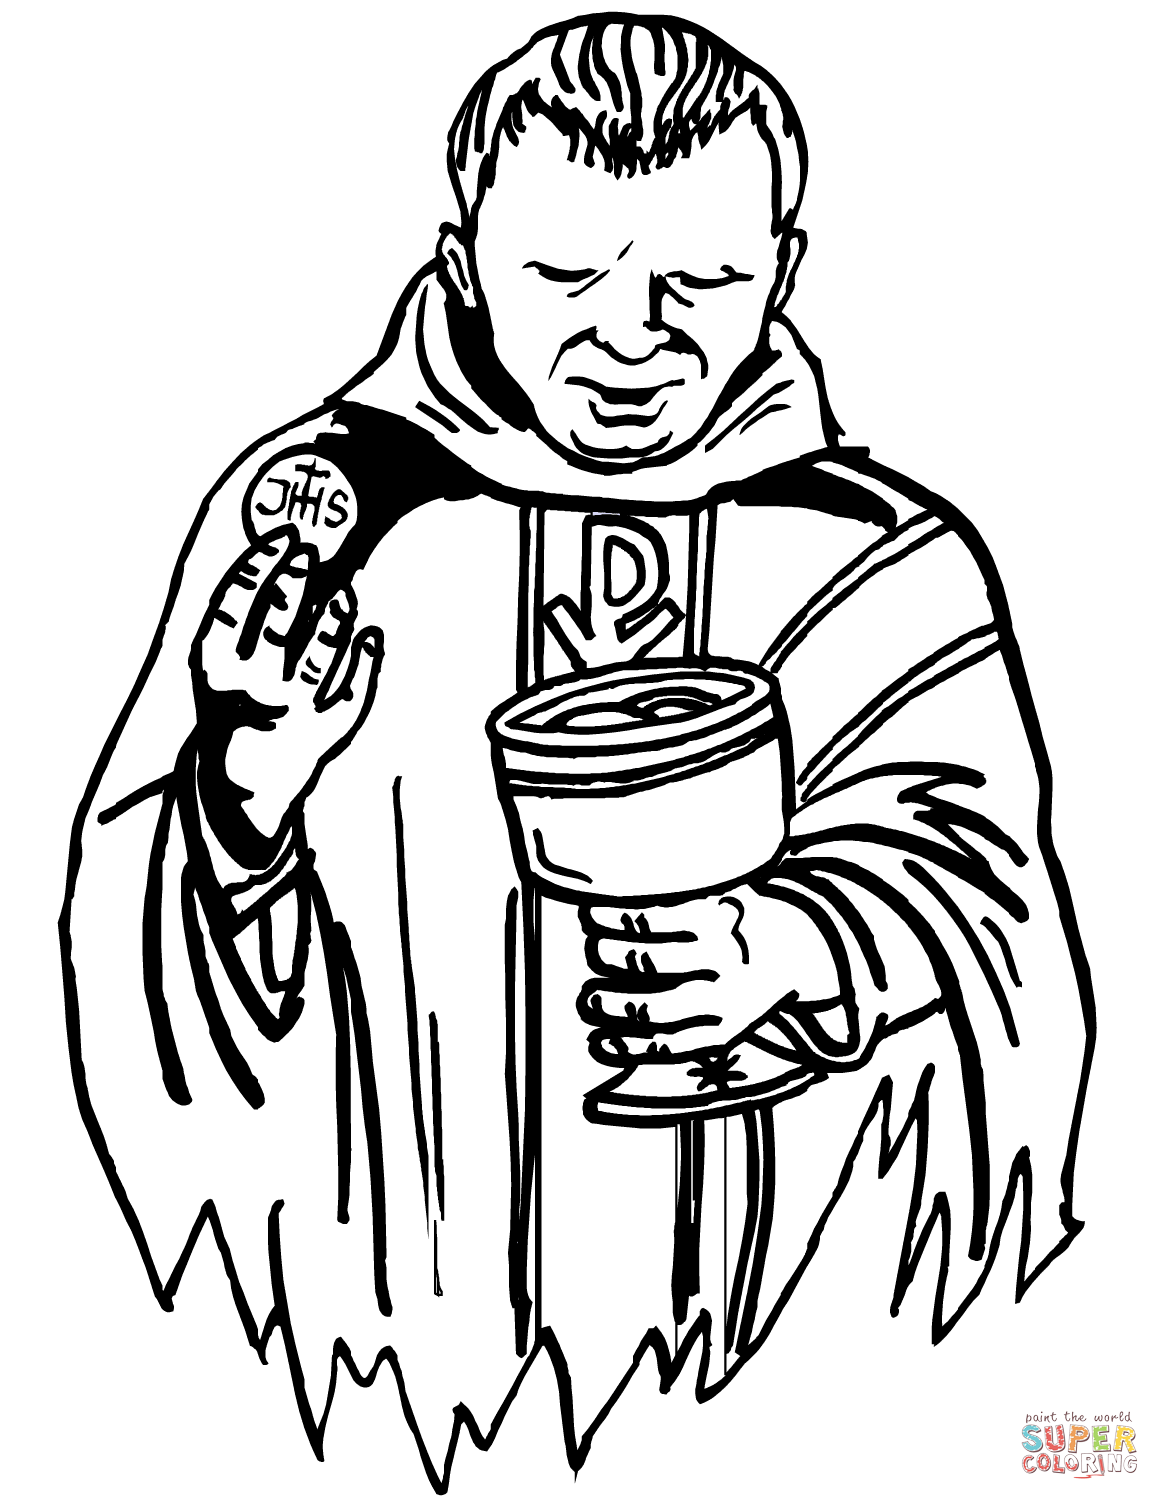 Christian Priest coloring page | Free Printable Coloring Pages